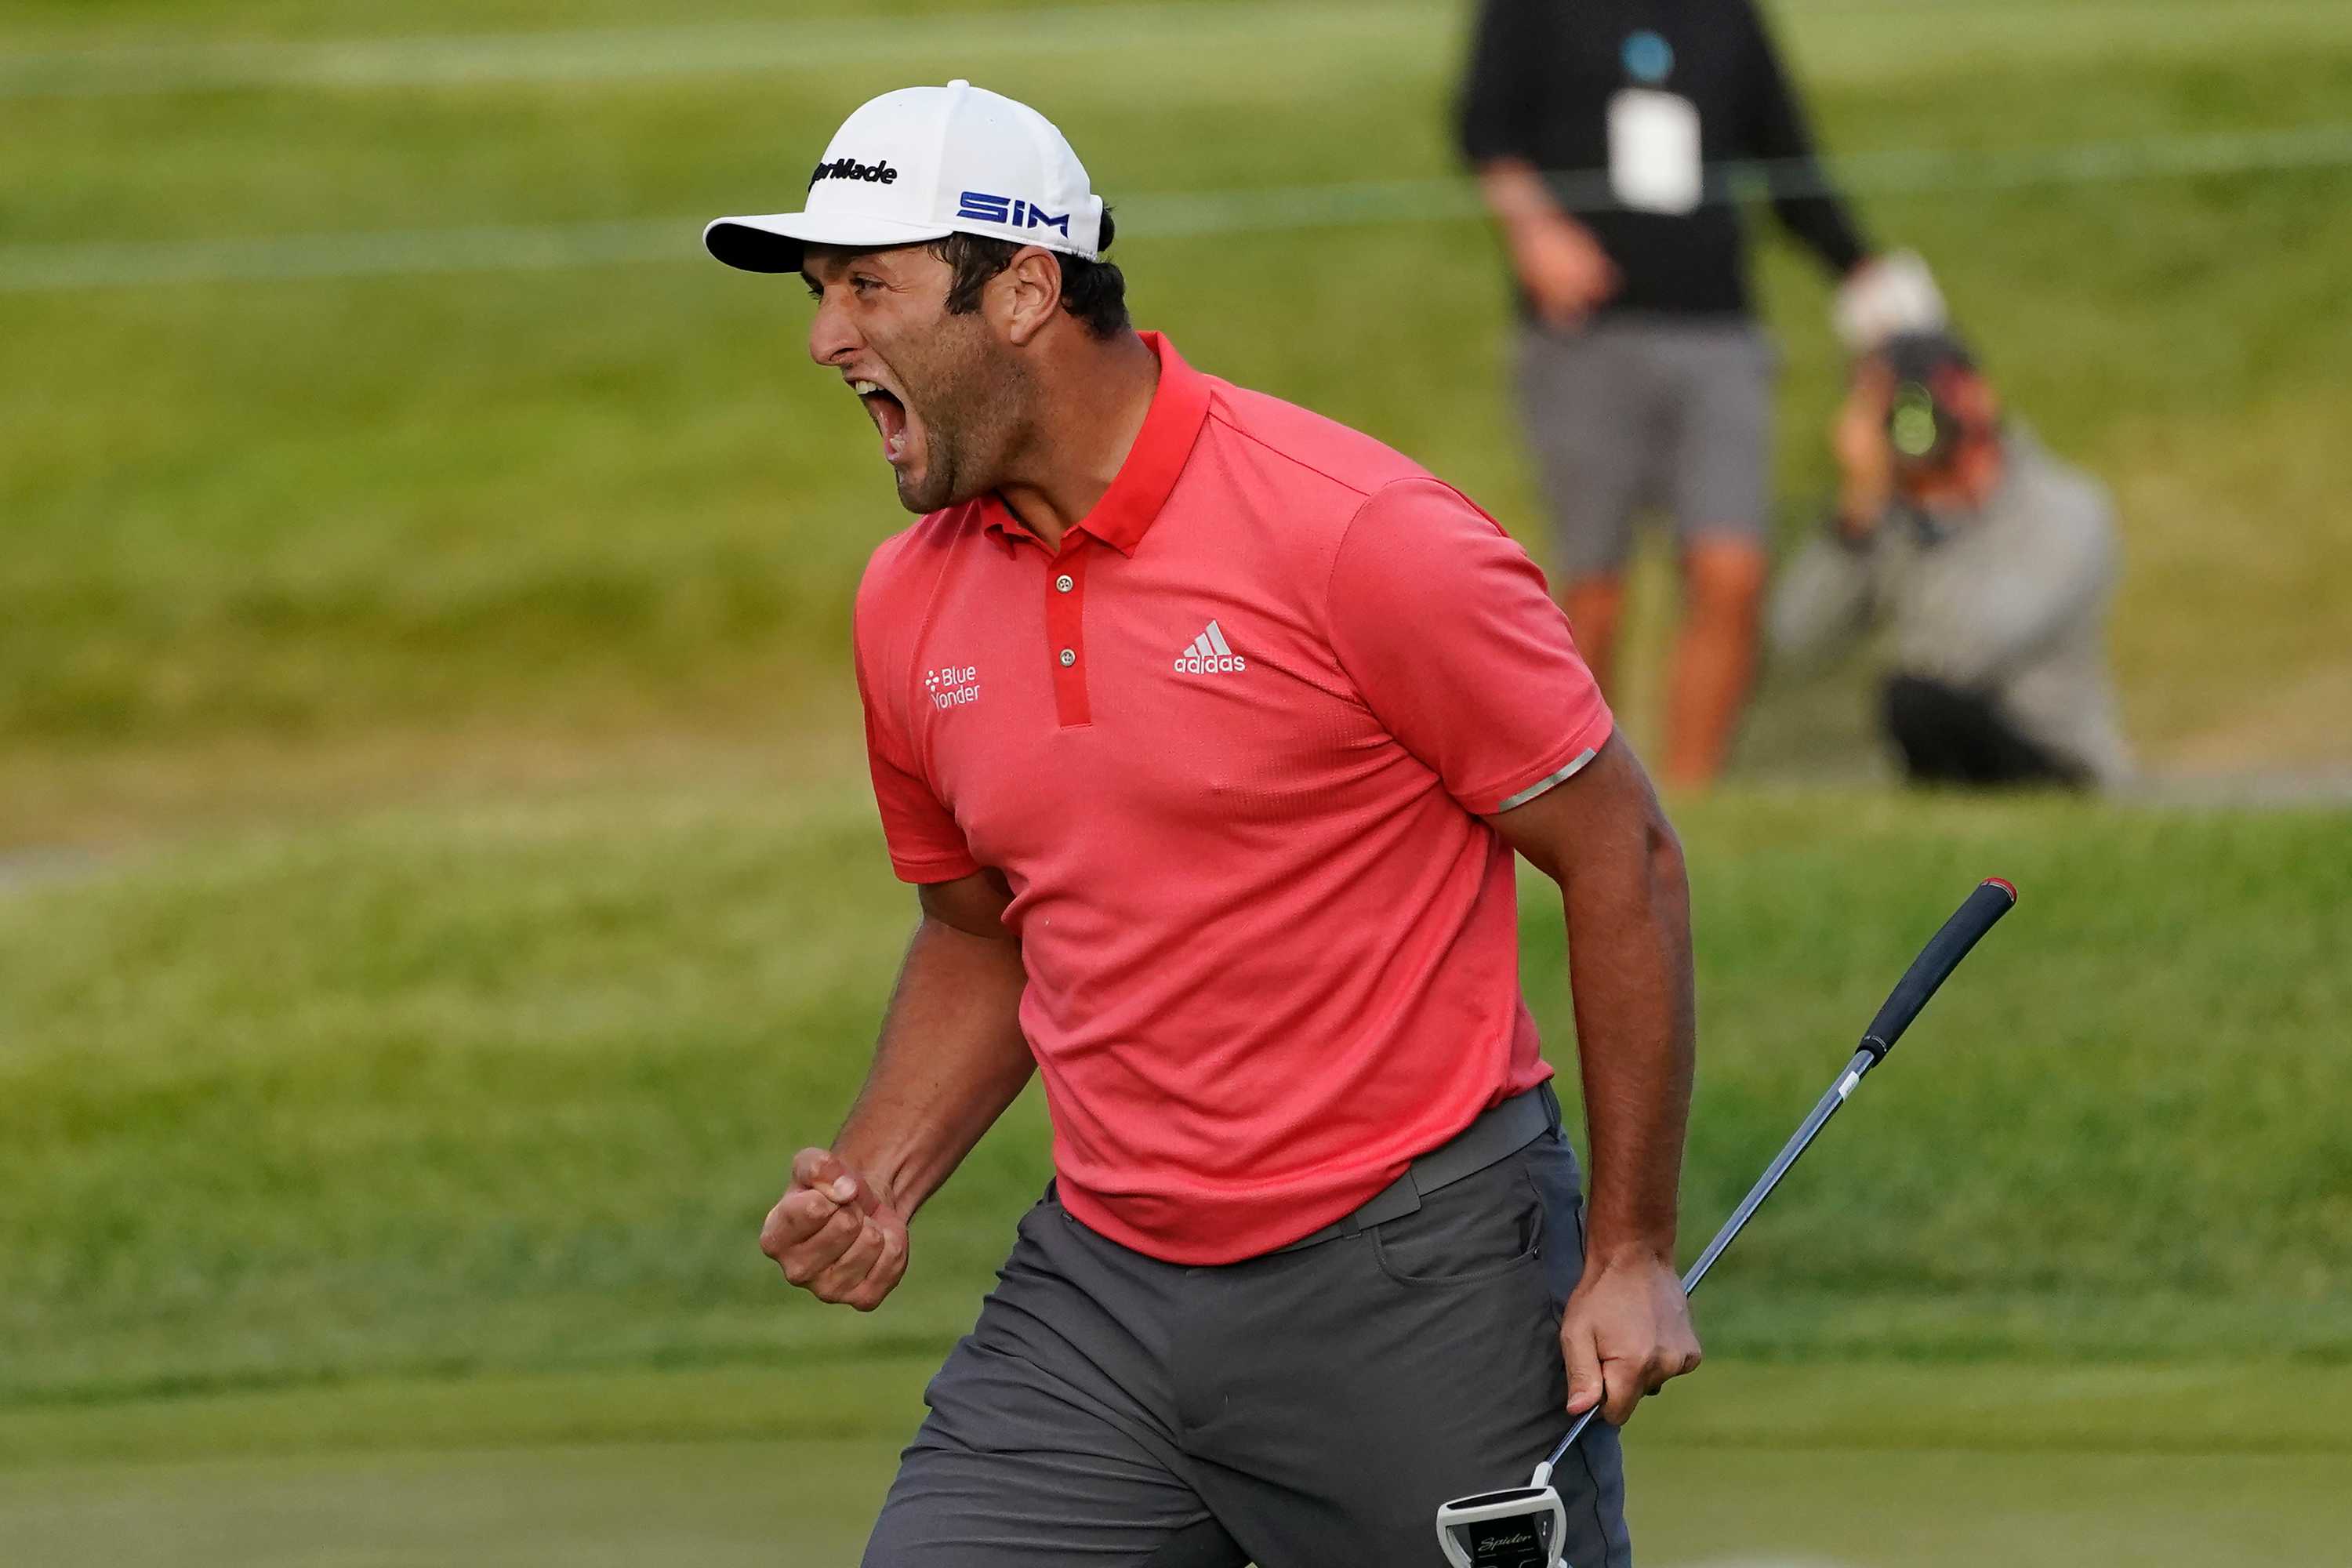 Jon Rahm secures playoff win at Olympia Fields with 66-foot putt